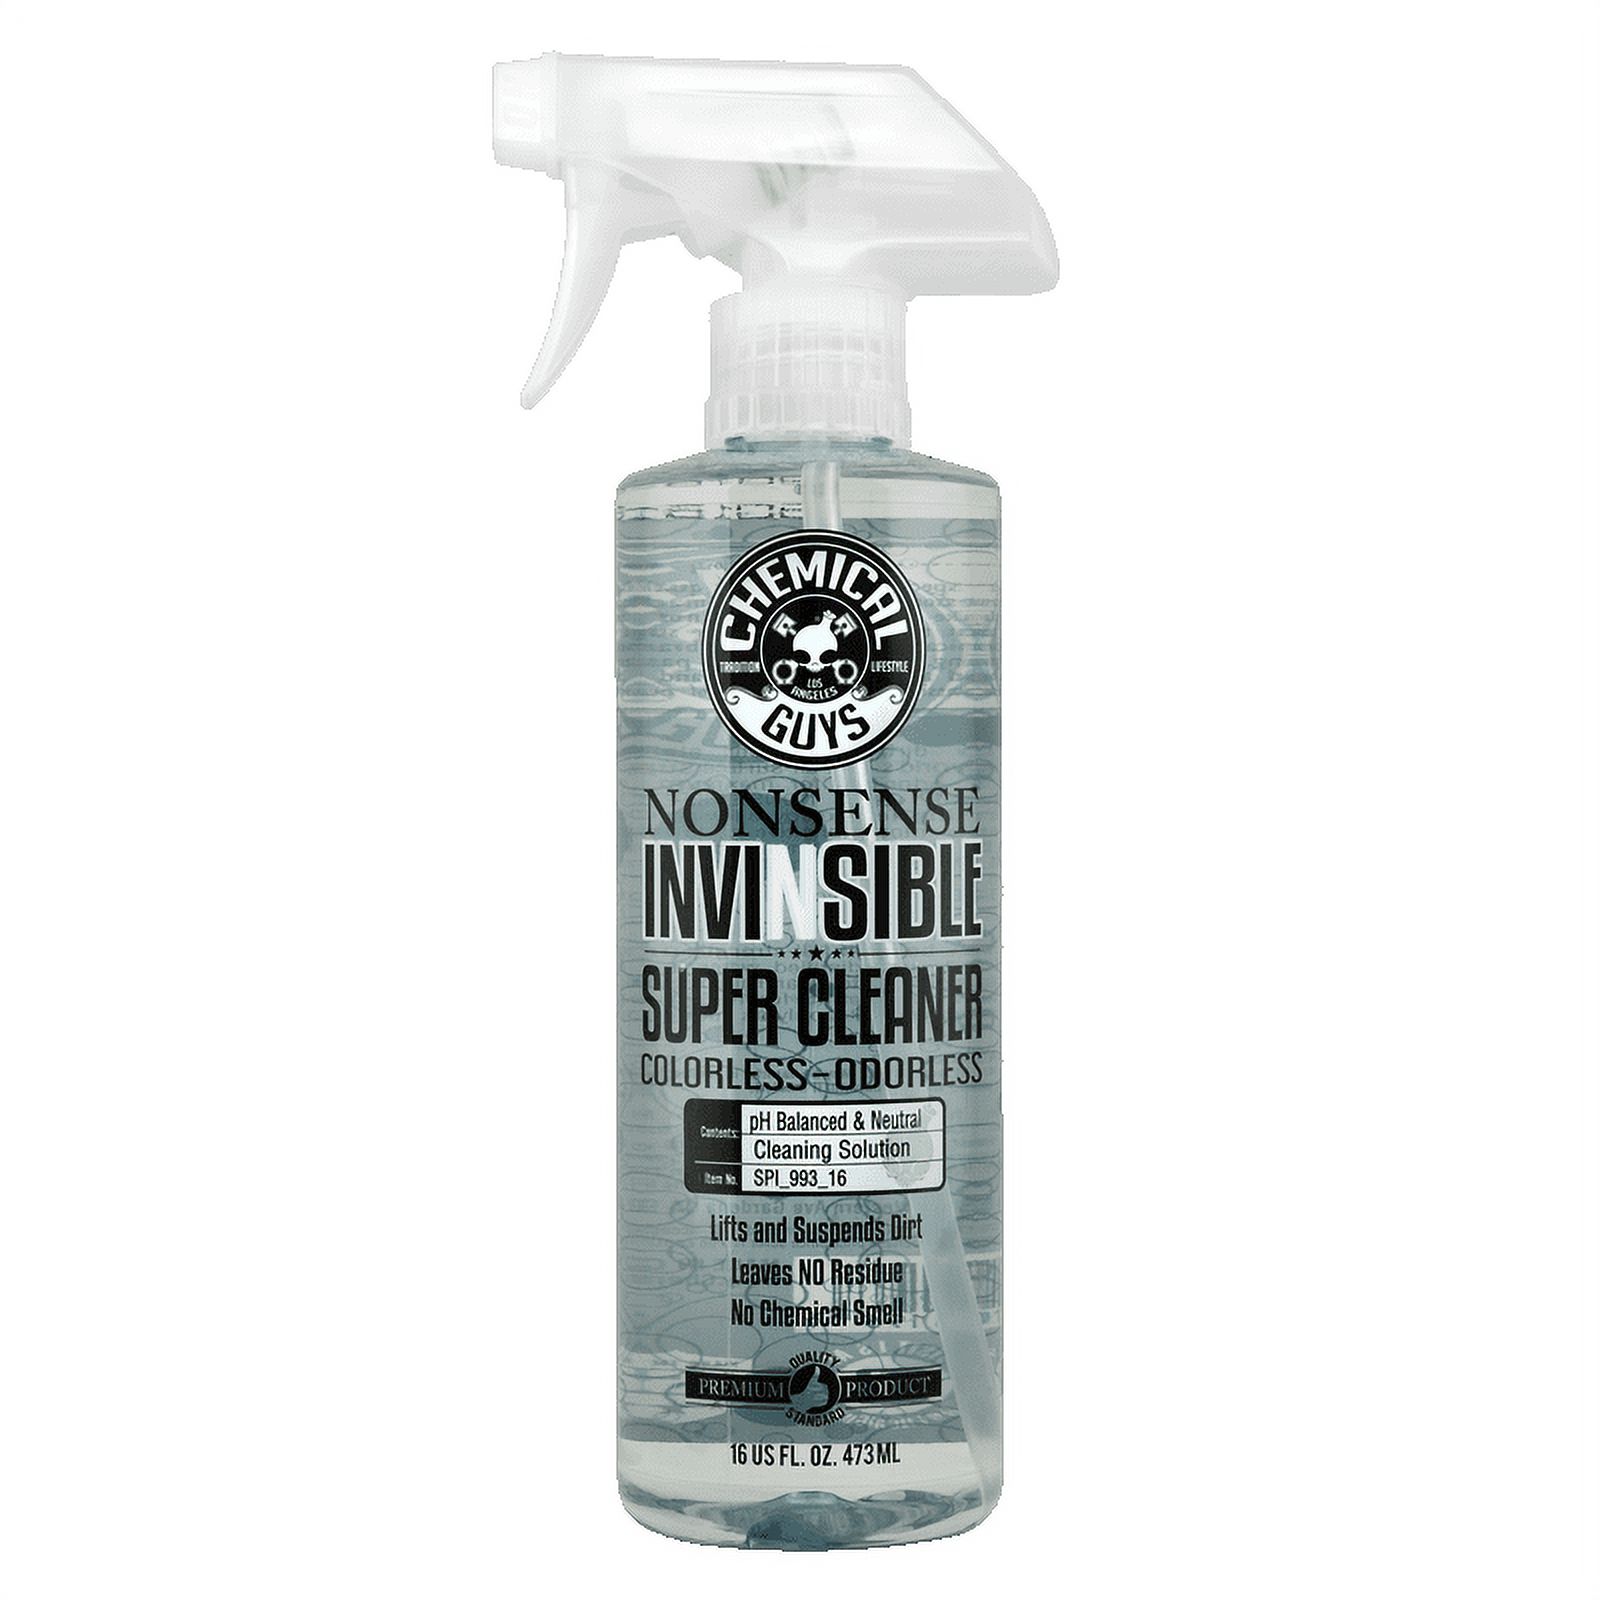 Nonsense Concentrated Cleaner 16Oz - image 1 of 12